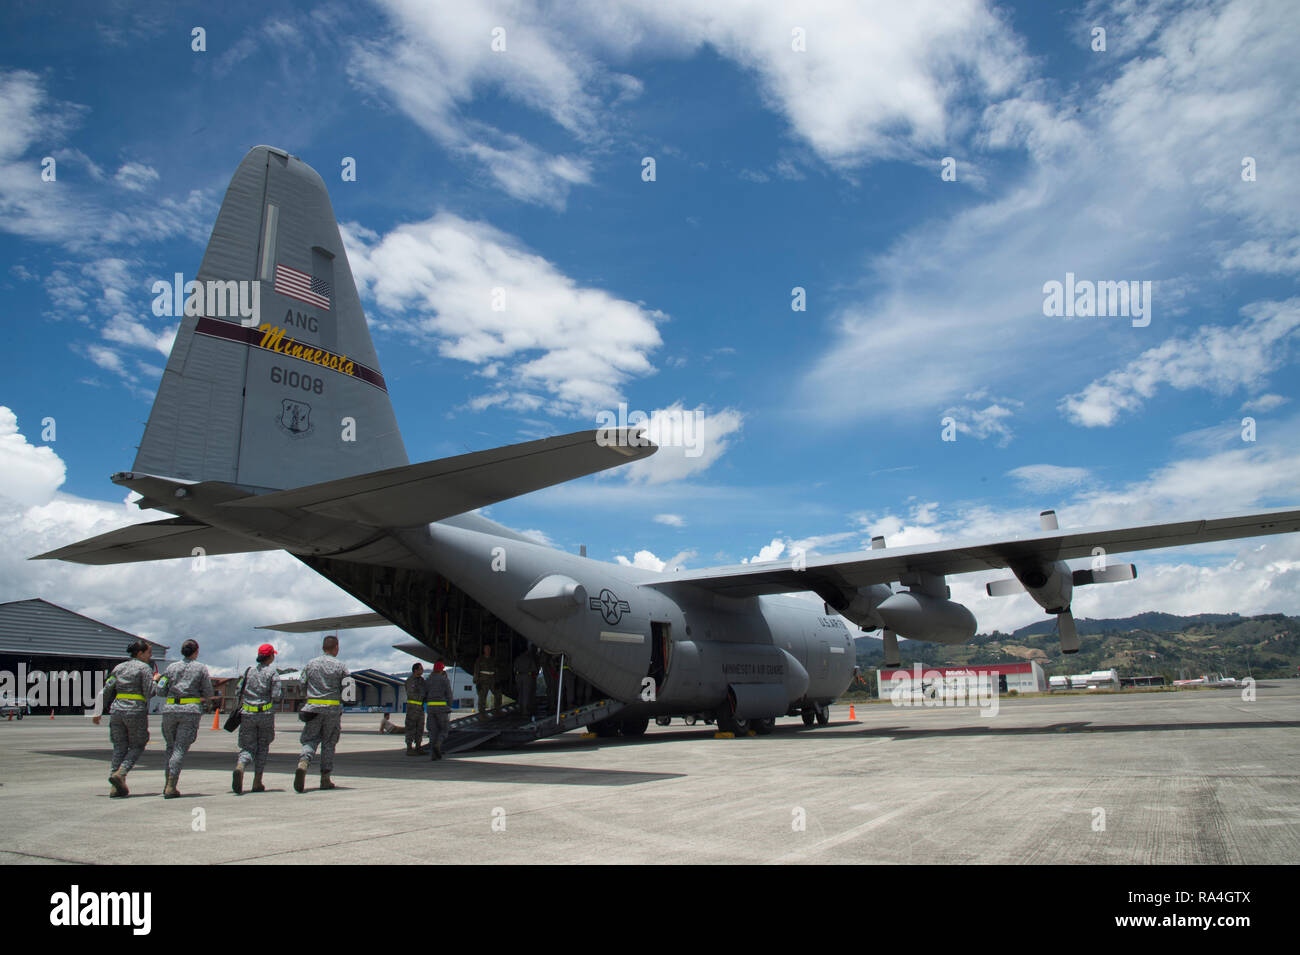 Colombian Air Force members walk onto a C-130 Hercules from the 133rd Airlift Squadron Minnesota Air National Guard at Air Combat Command number 5 at Arturo Lema Posada Air Base in Rionegro, Colombia, Sept. 4, 2018 as part of Angel de Los Andes. The two-week Colombian-led exercise has more than 400 participants from 12 nations. The first week of the exercise is focused on responding to natural disaster scenarios that include an earthquake response, a forest fire and an open water rescue, as well as, responding to an aircraft crash. (U.S. Air Force photo by Tech. Sgt. Angela Ruiz) Stock Photo